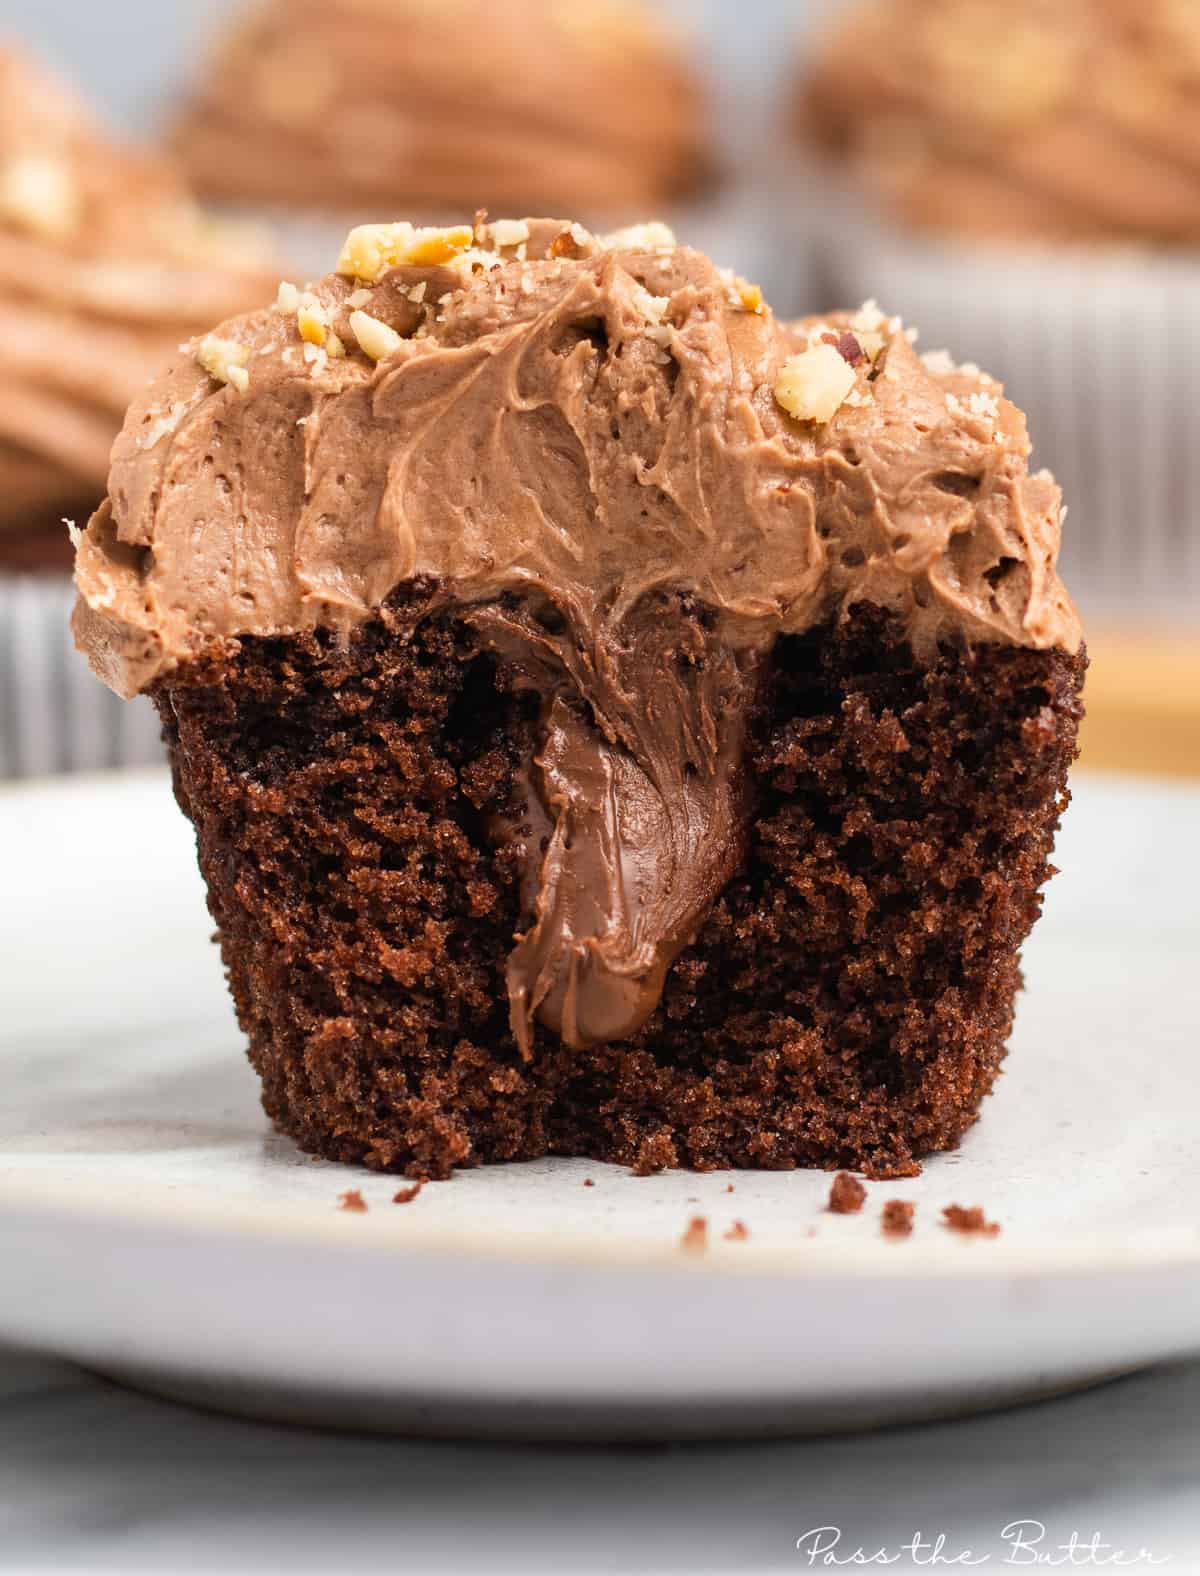 Nutella filling in the center of the cupcake